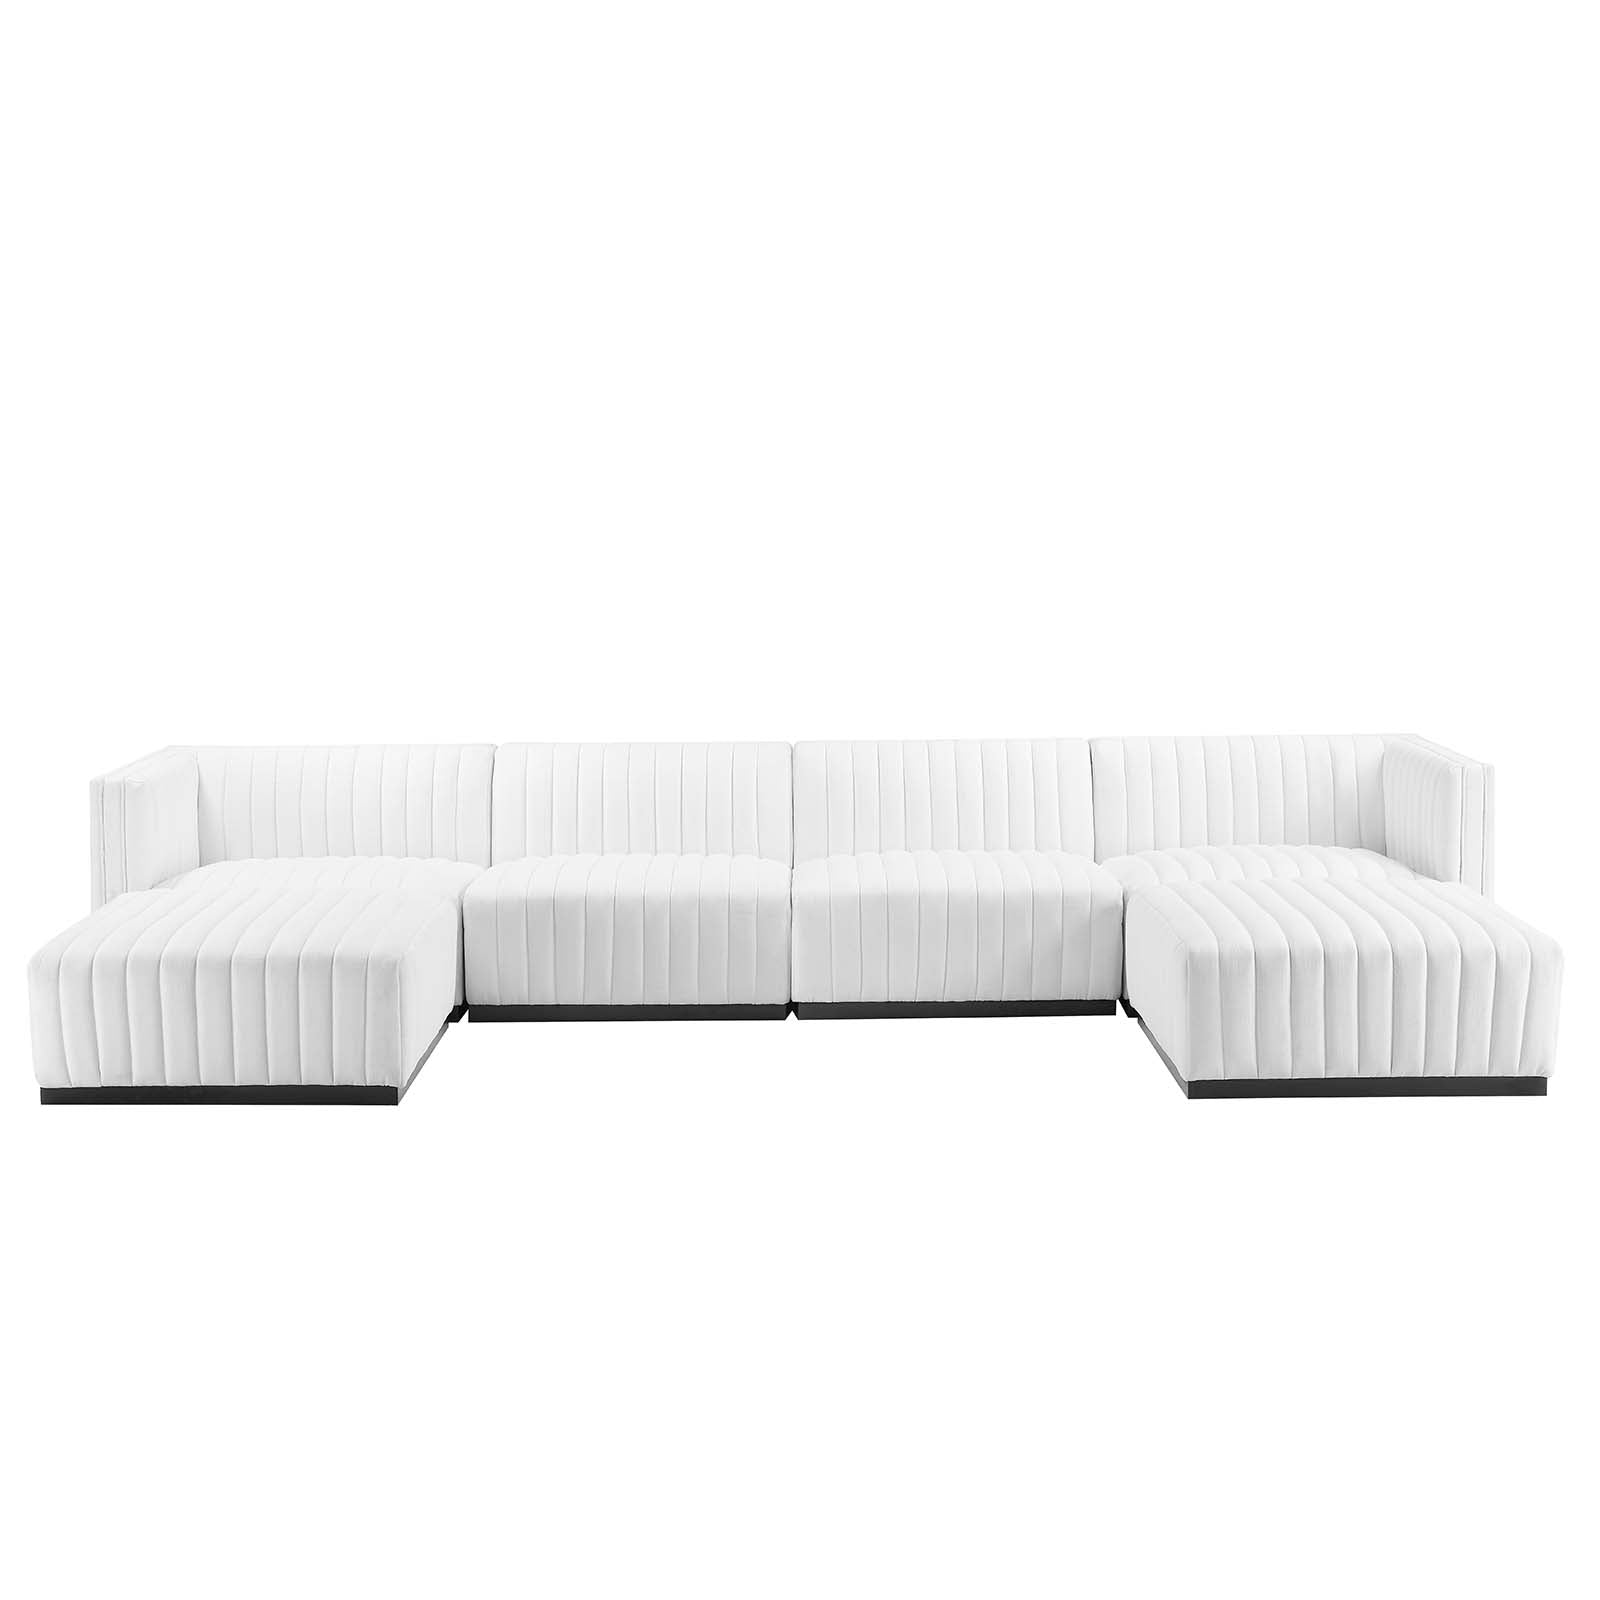 Modway Sectional Sofas - Conjure Channel Tufted Upholstered Fabric 6-Piece Sectional Sofa BlackWhite